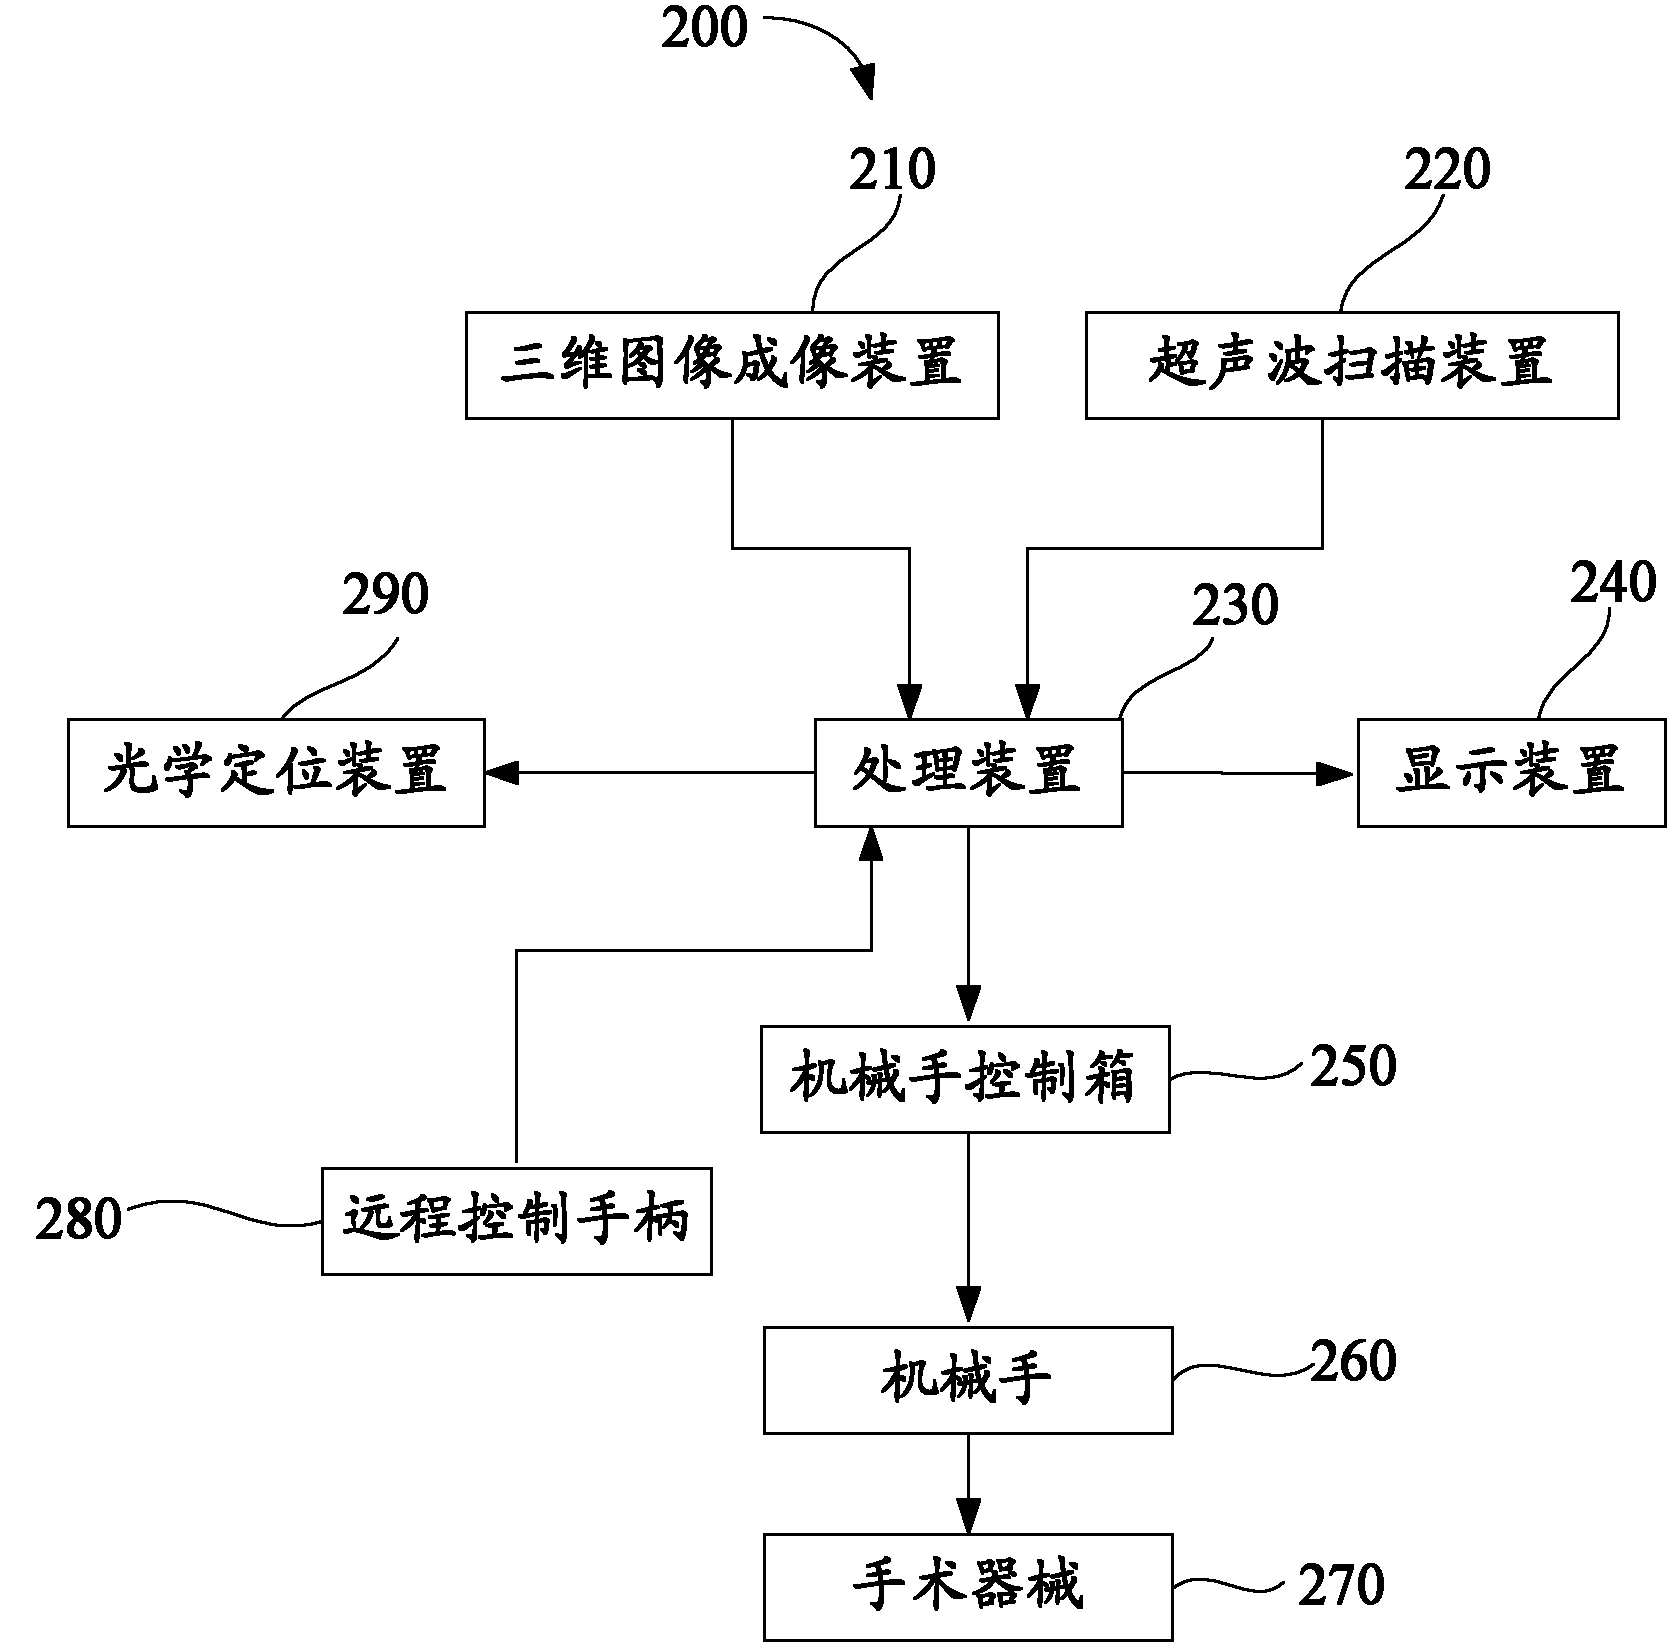 Surgery guiding system and method